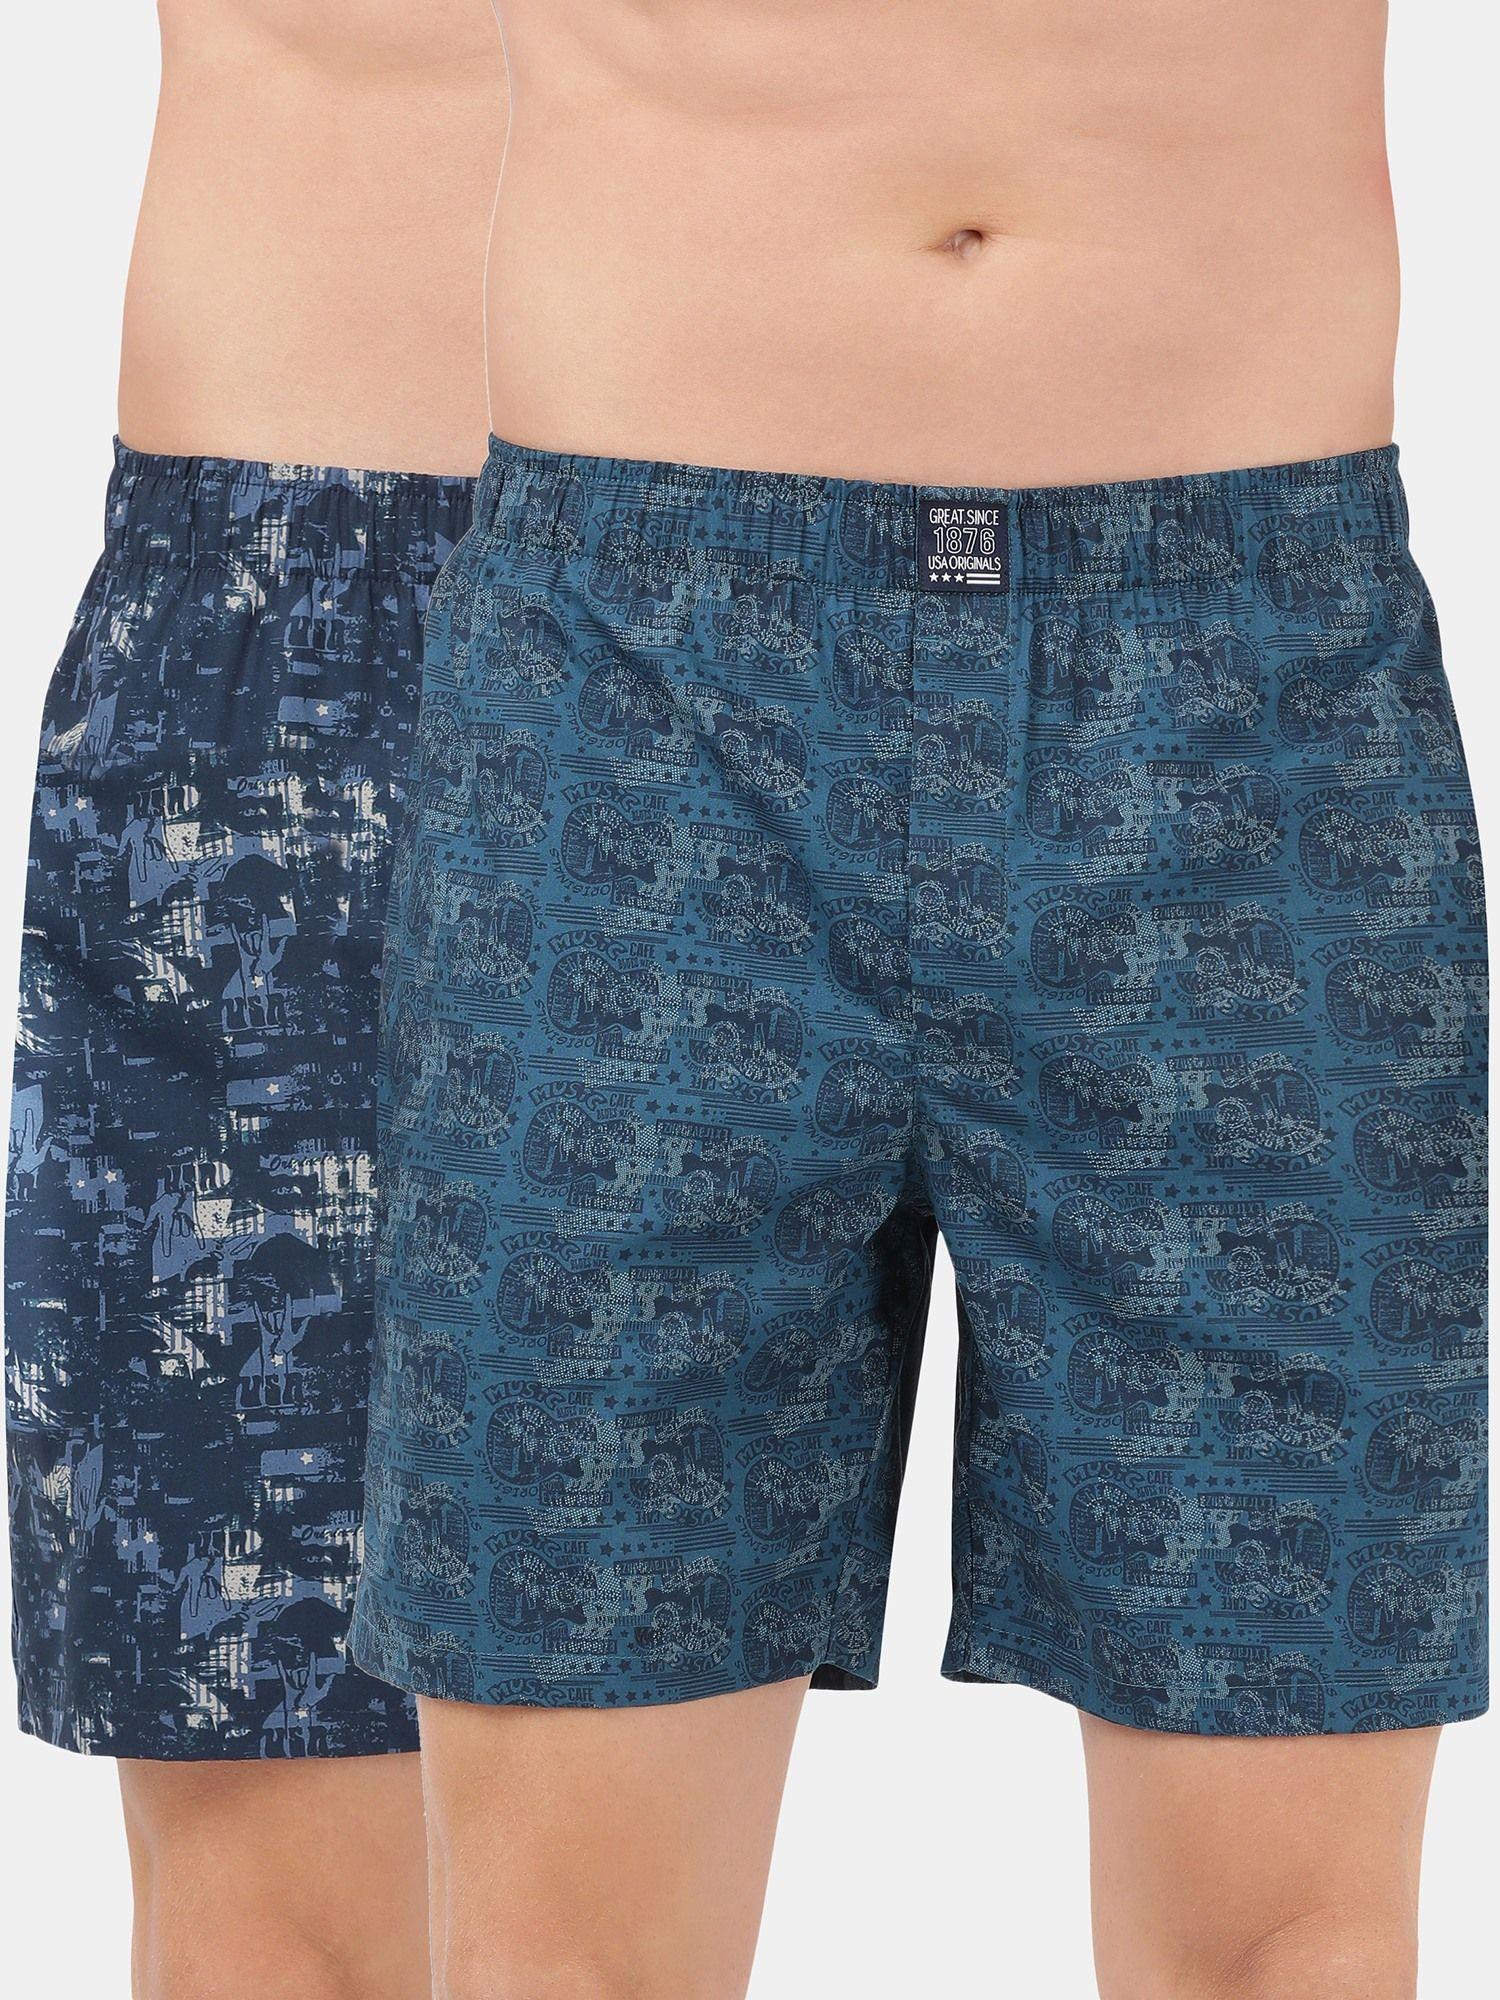 us57 mens cotton woven boxer shorts with side pocket - navy seaport teal (pack of 2)